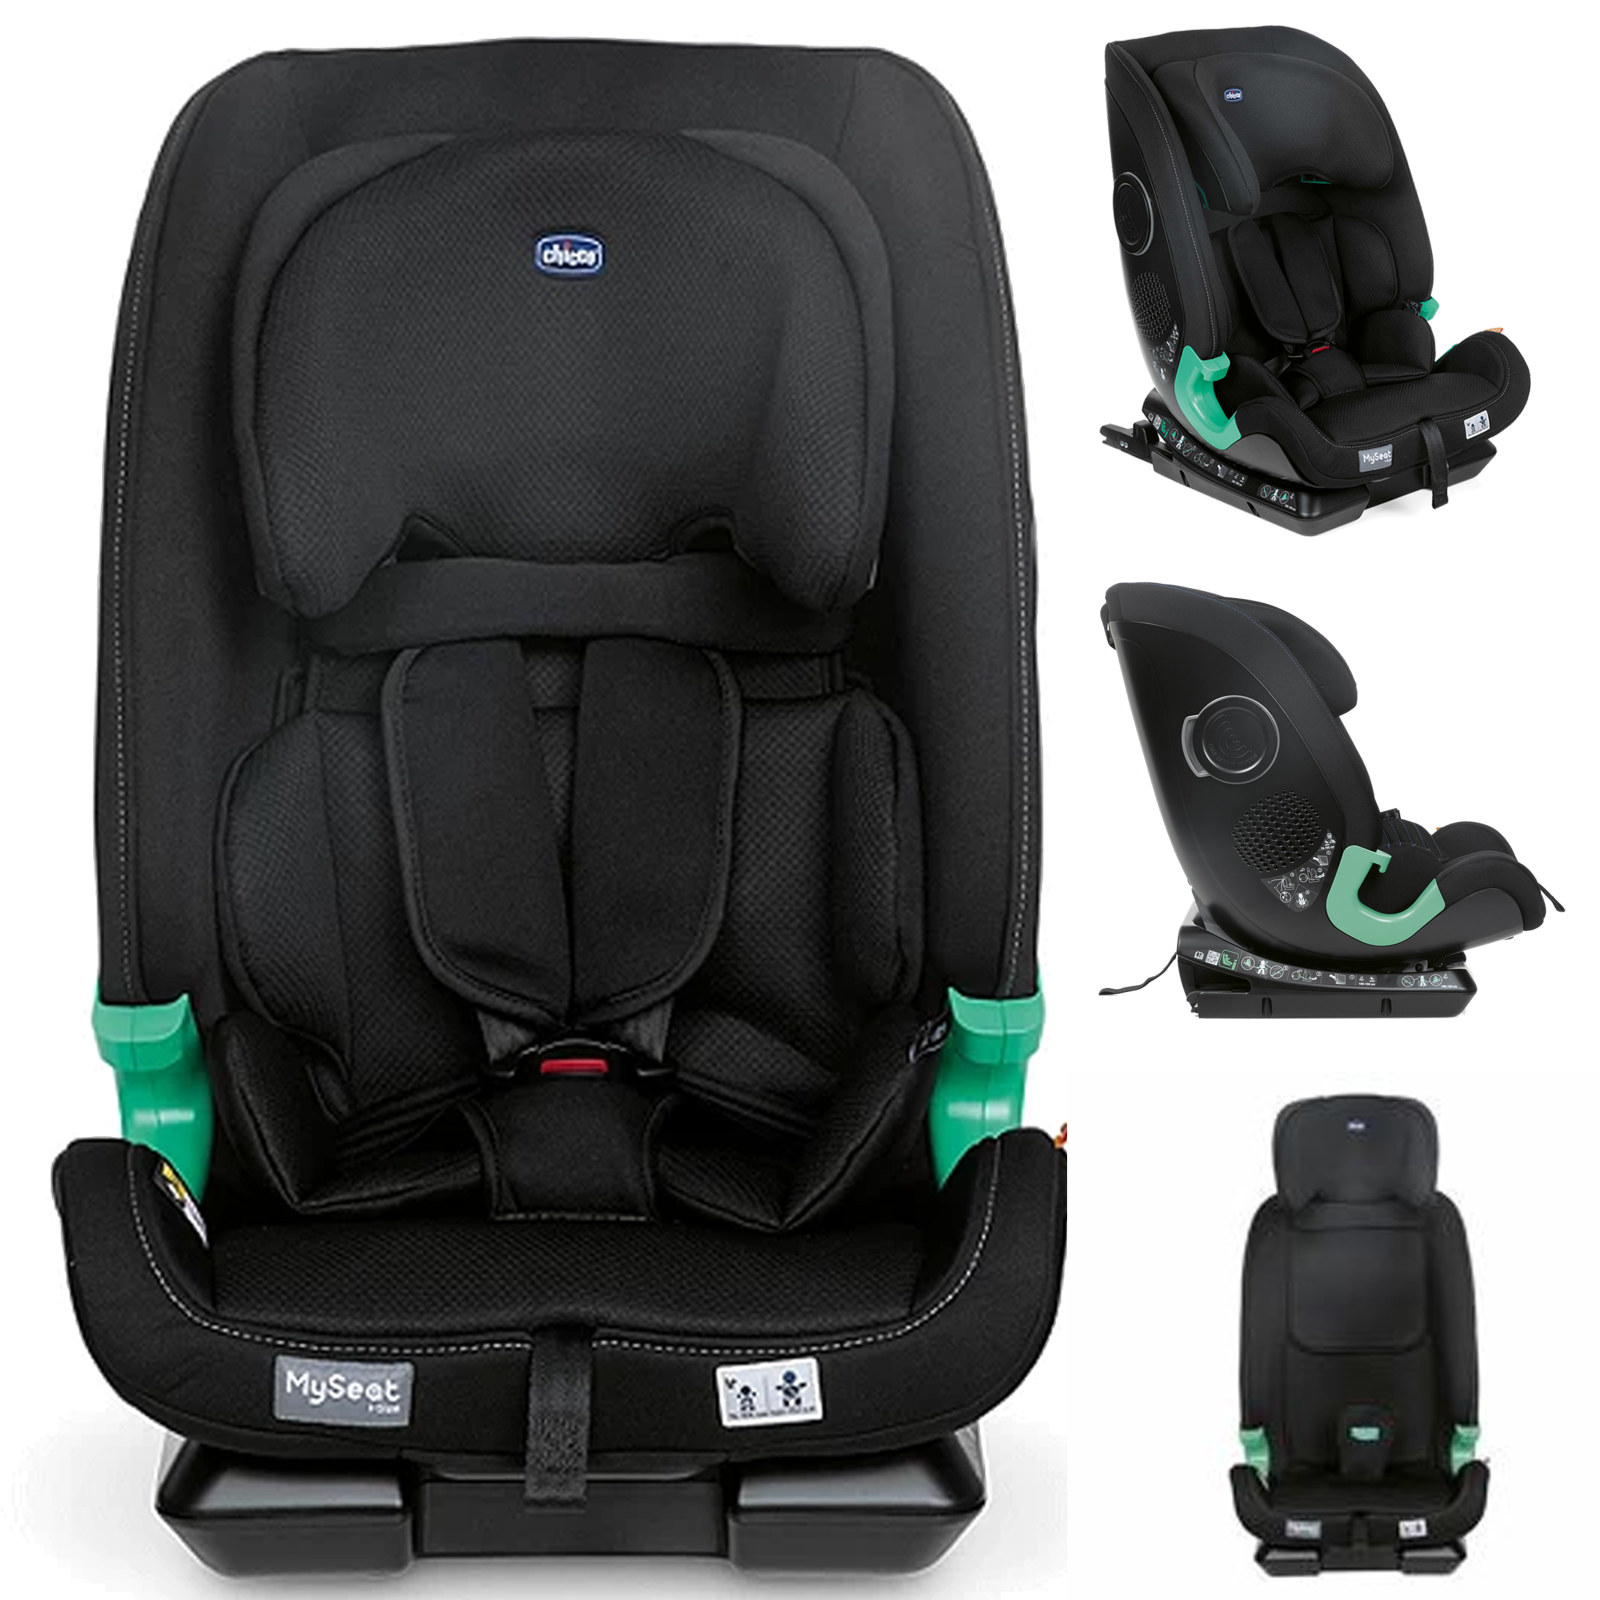 Chicco Myseat i-Size Group 1/2/3 ISOFIX Car Seat - Black (15 Months-12 Years)